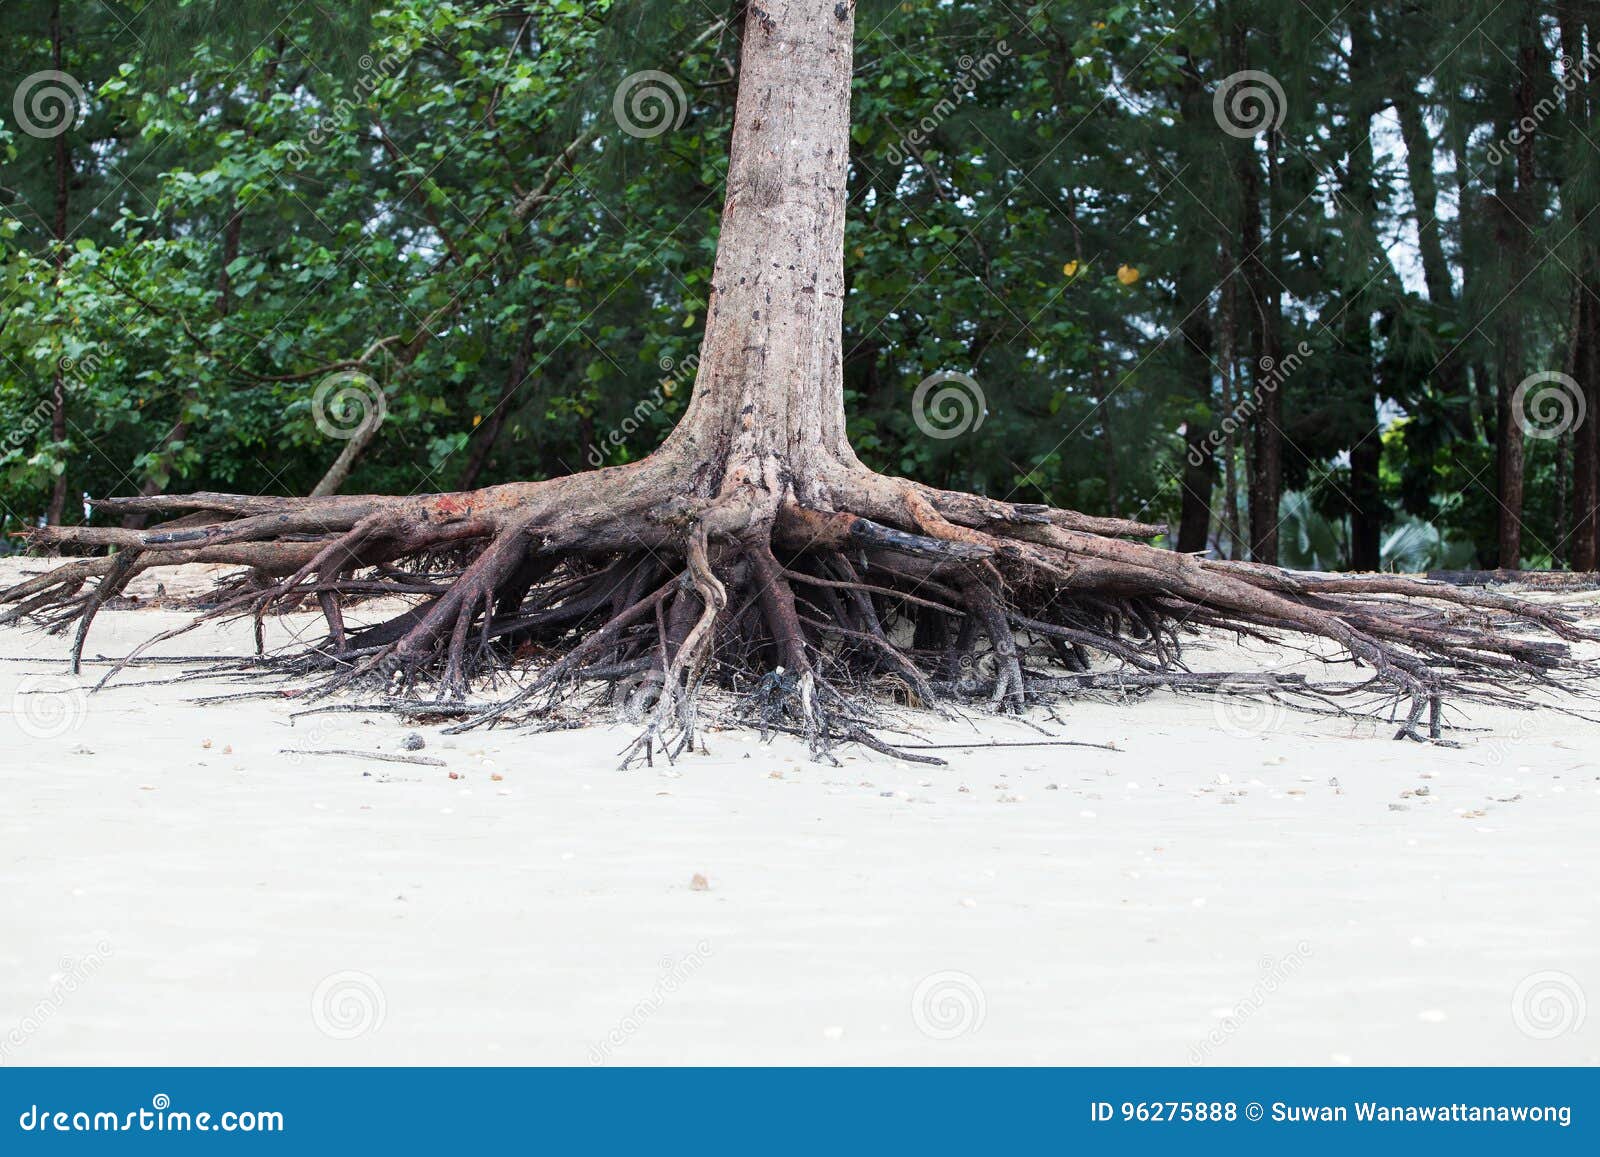 roots of tree standing dead because erode by seawater